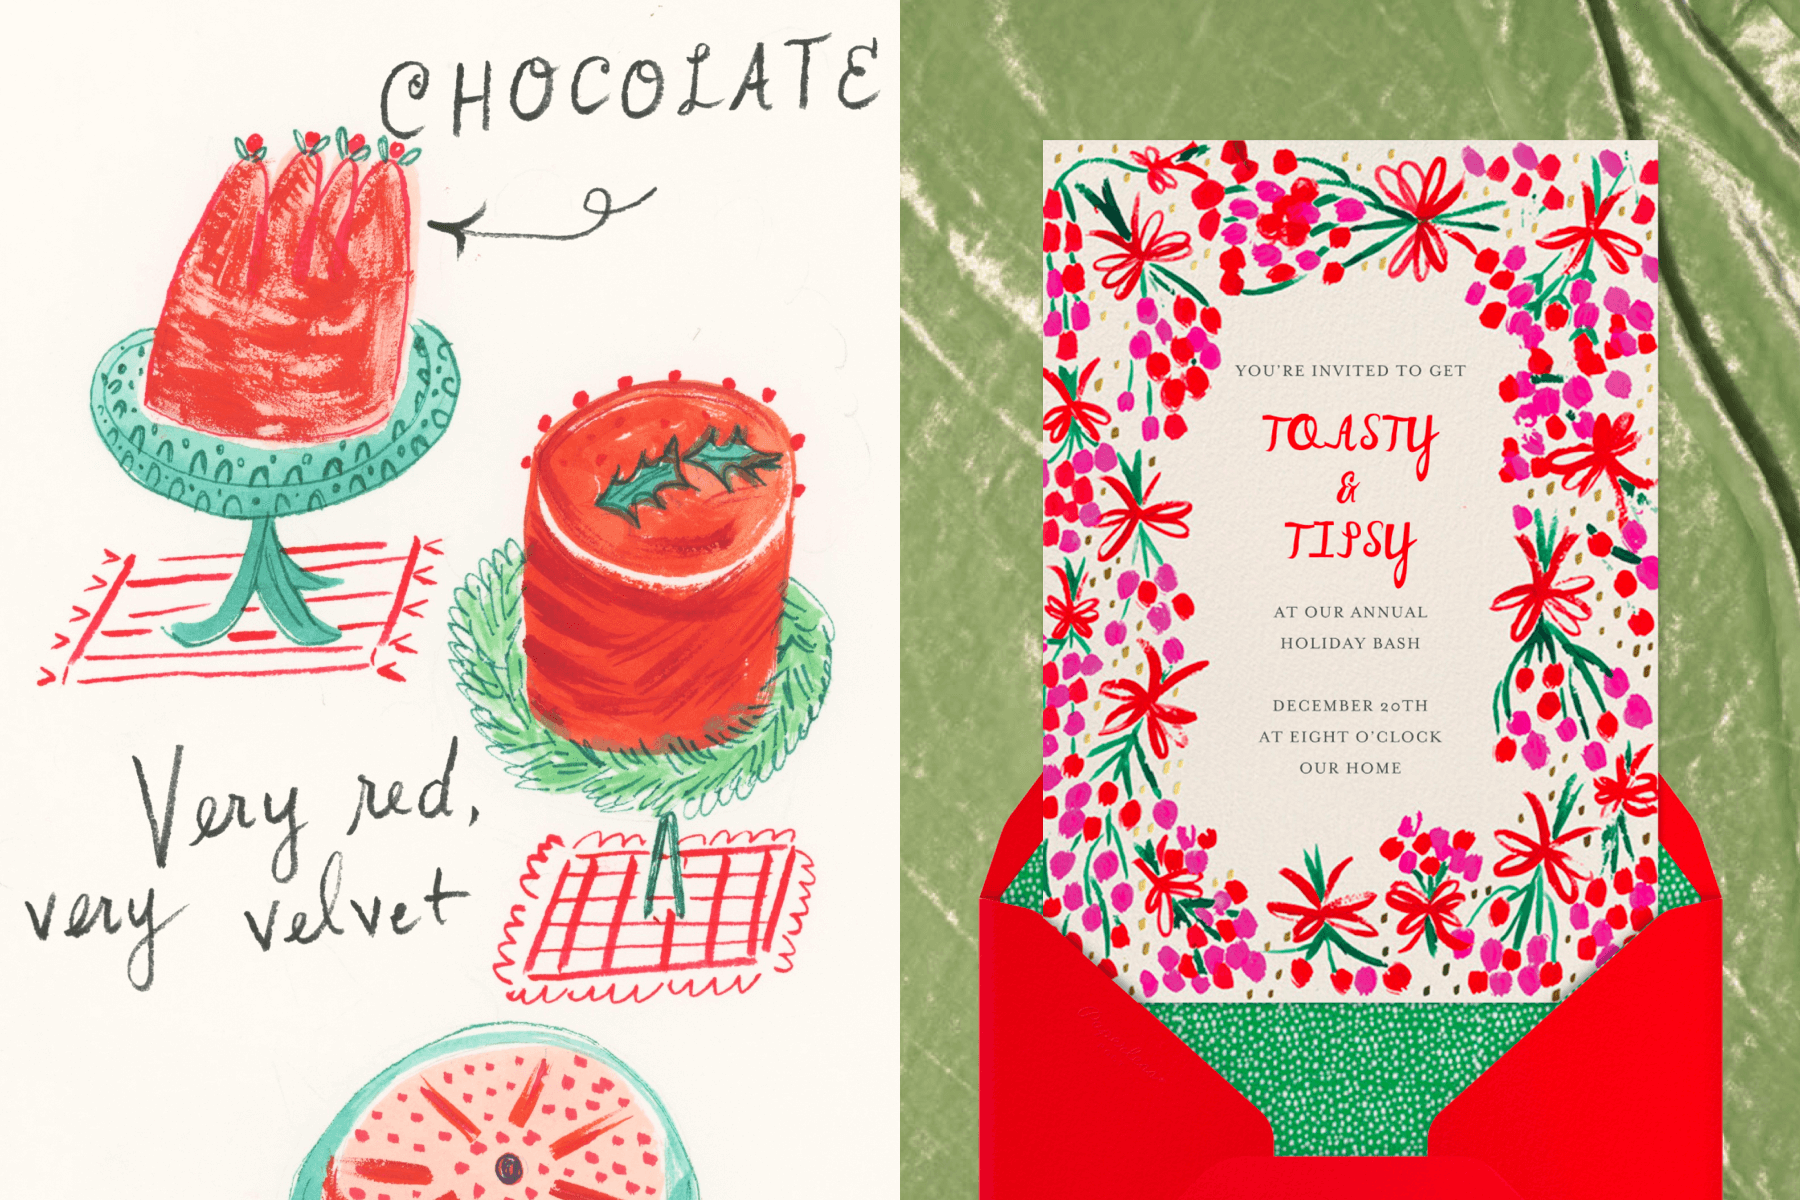 left: Childlike drawings of three different red dessert cakes on green stands with the labels “chocolate,” “very red, very velvet,” and “Juniper’s tart.” Right: A white holiday party invitation with simplified illustrations of pink and red floral bouquets tied with bows around the border